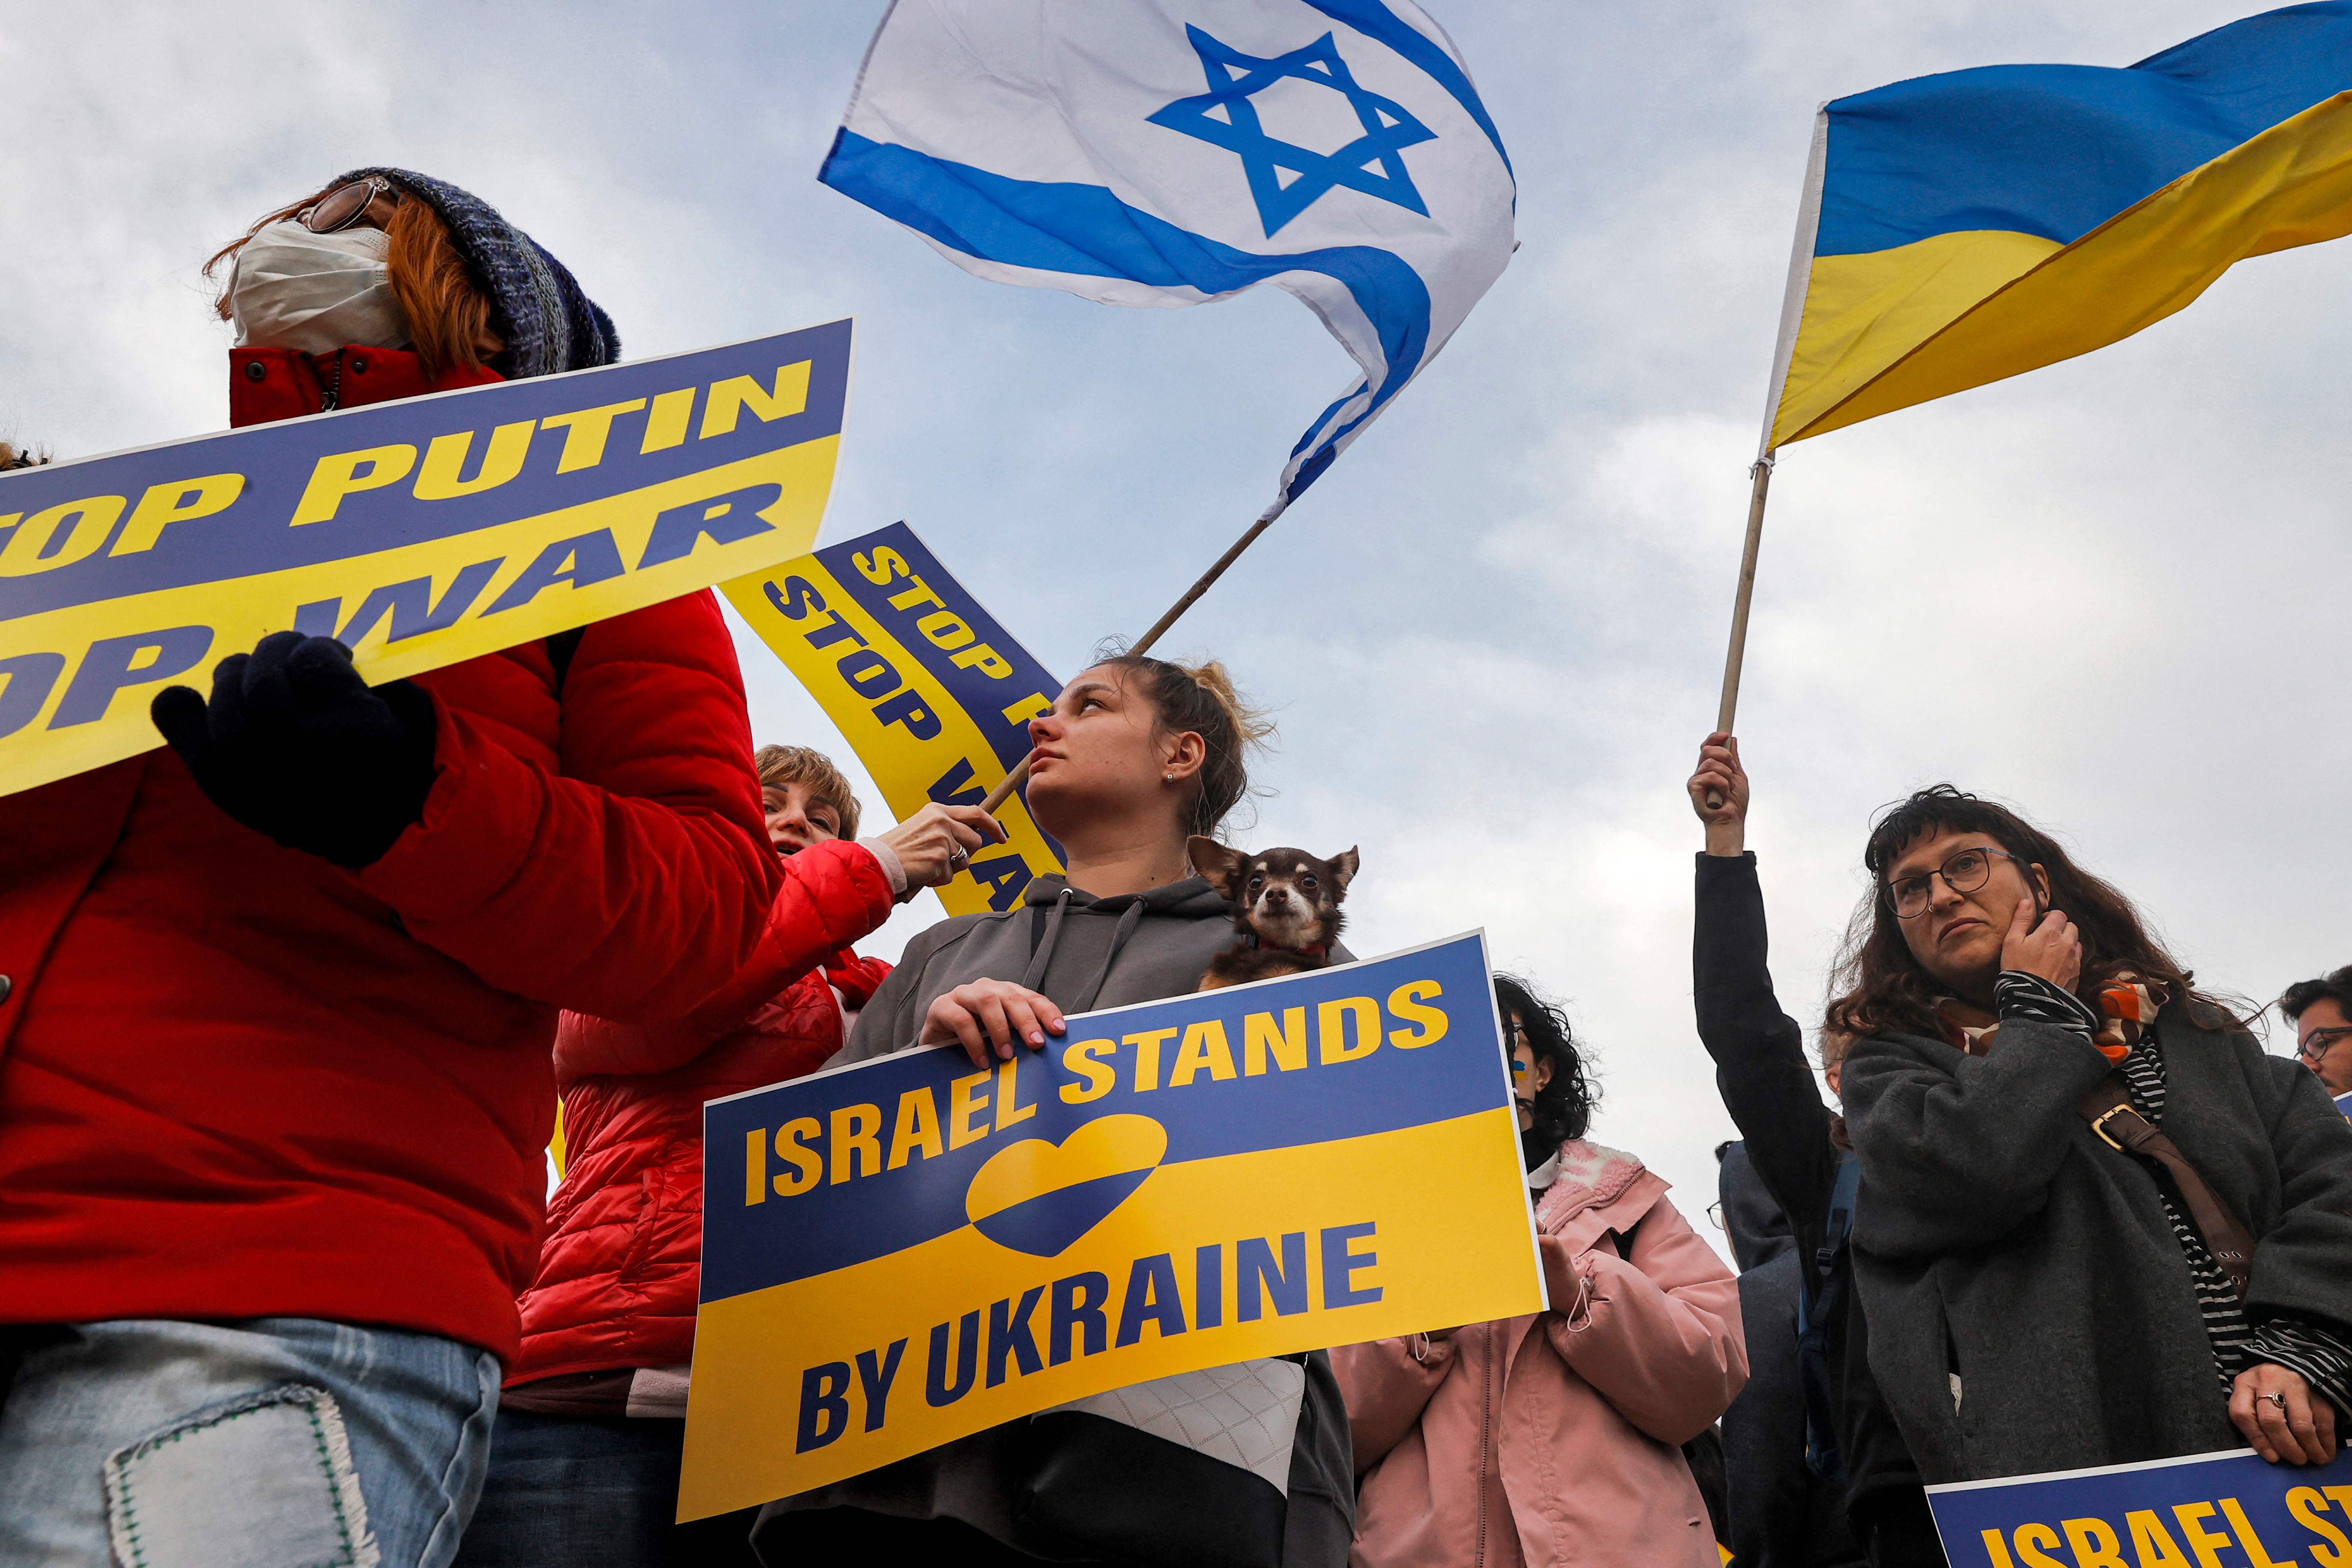 Demonstrators wave flags of Israel and Ukraine during a protest against Russia’s invasion of Ukraine and ahead of a televised address by the Ukrainian president in Tel Aviv on March 20, 2022. Photo: JACK GUEZ / AFP / picturedesk.com